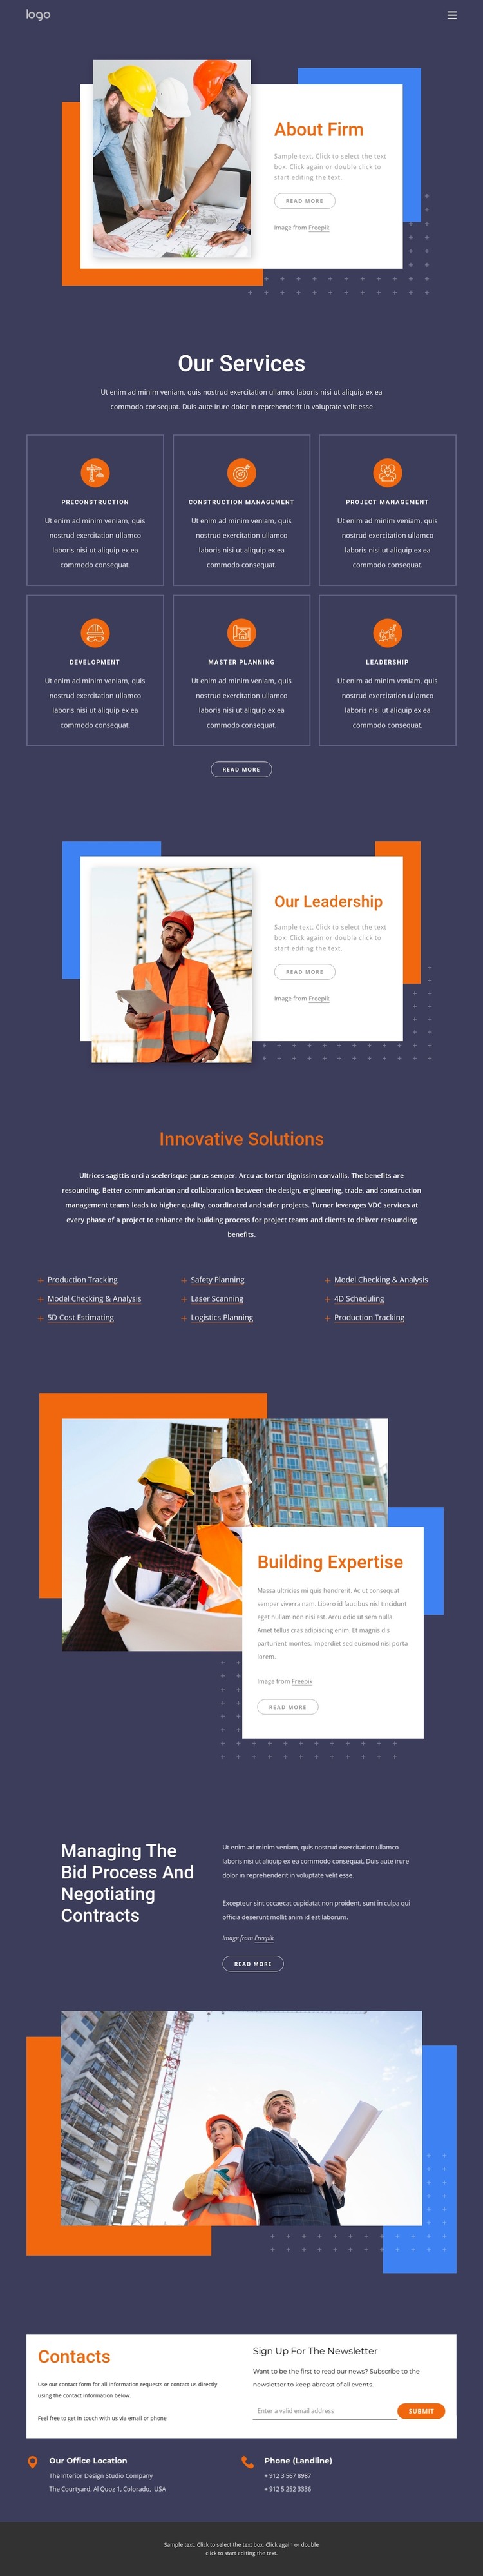 We build the structures and infrastructure WordPress Theme